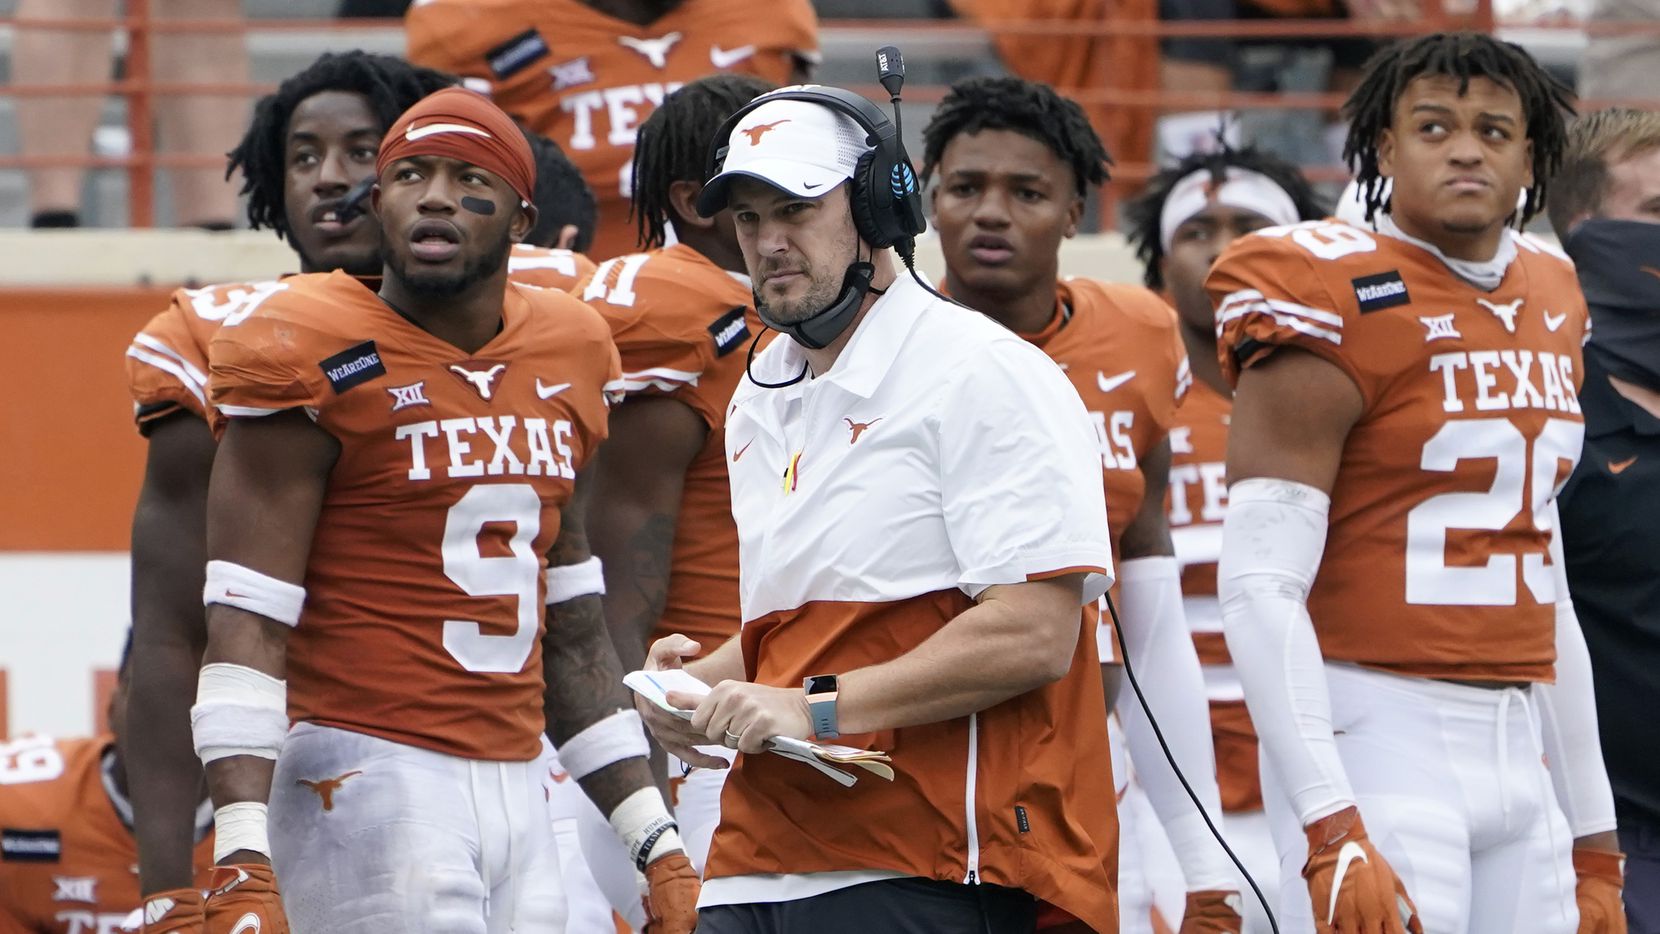 Texas head coach Tom Herman, center, on the side lines during the second half of an NCAA college football game against Iowa State, Friday, Nov. 27, 2020, in Austin, Texas. (AP Photo/Eric Gay)